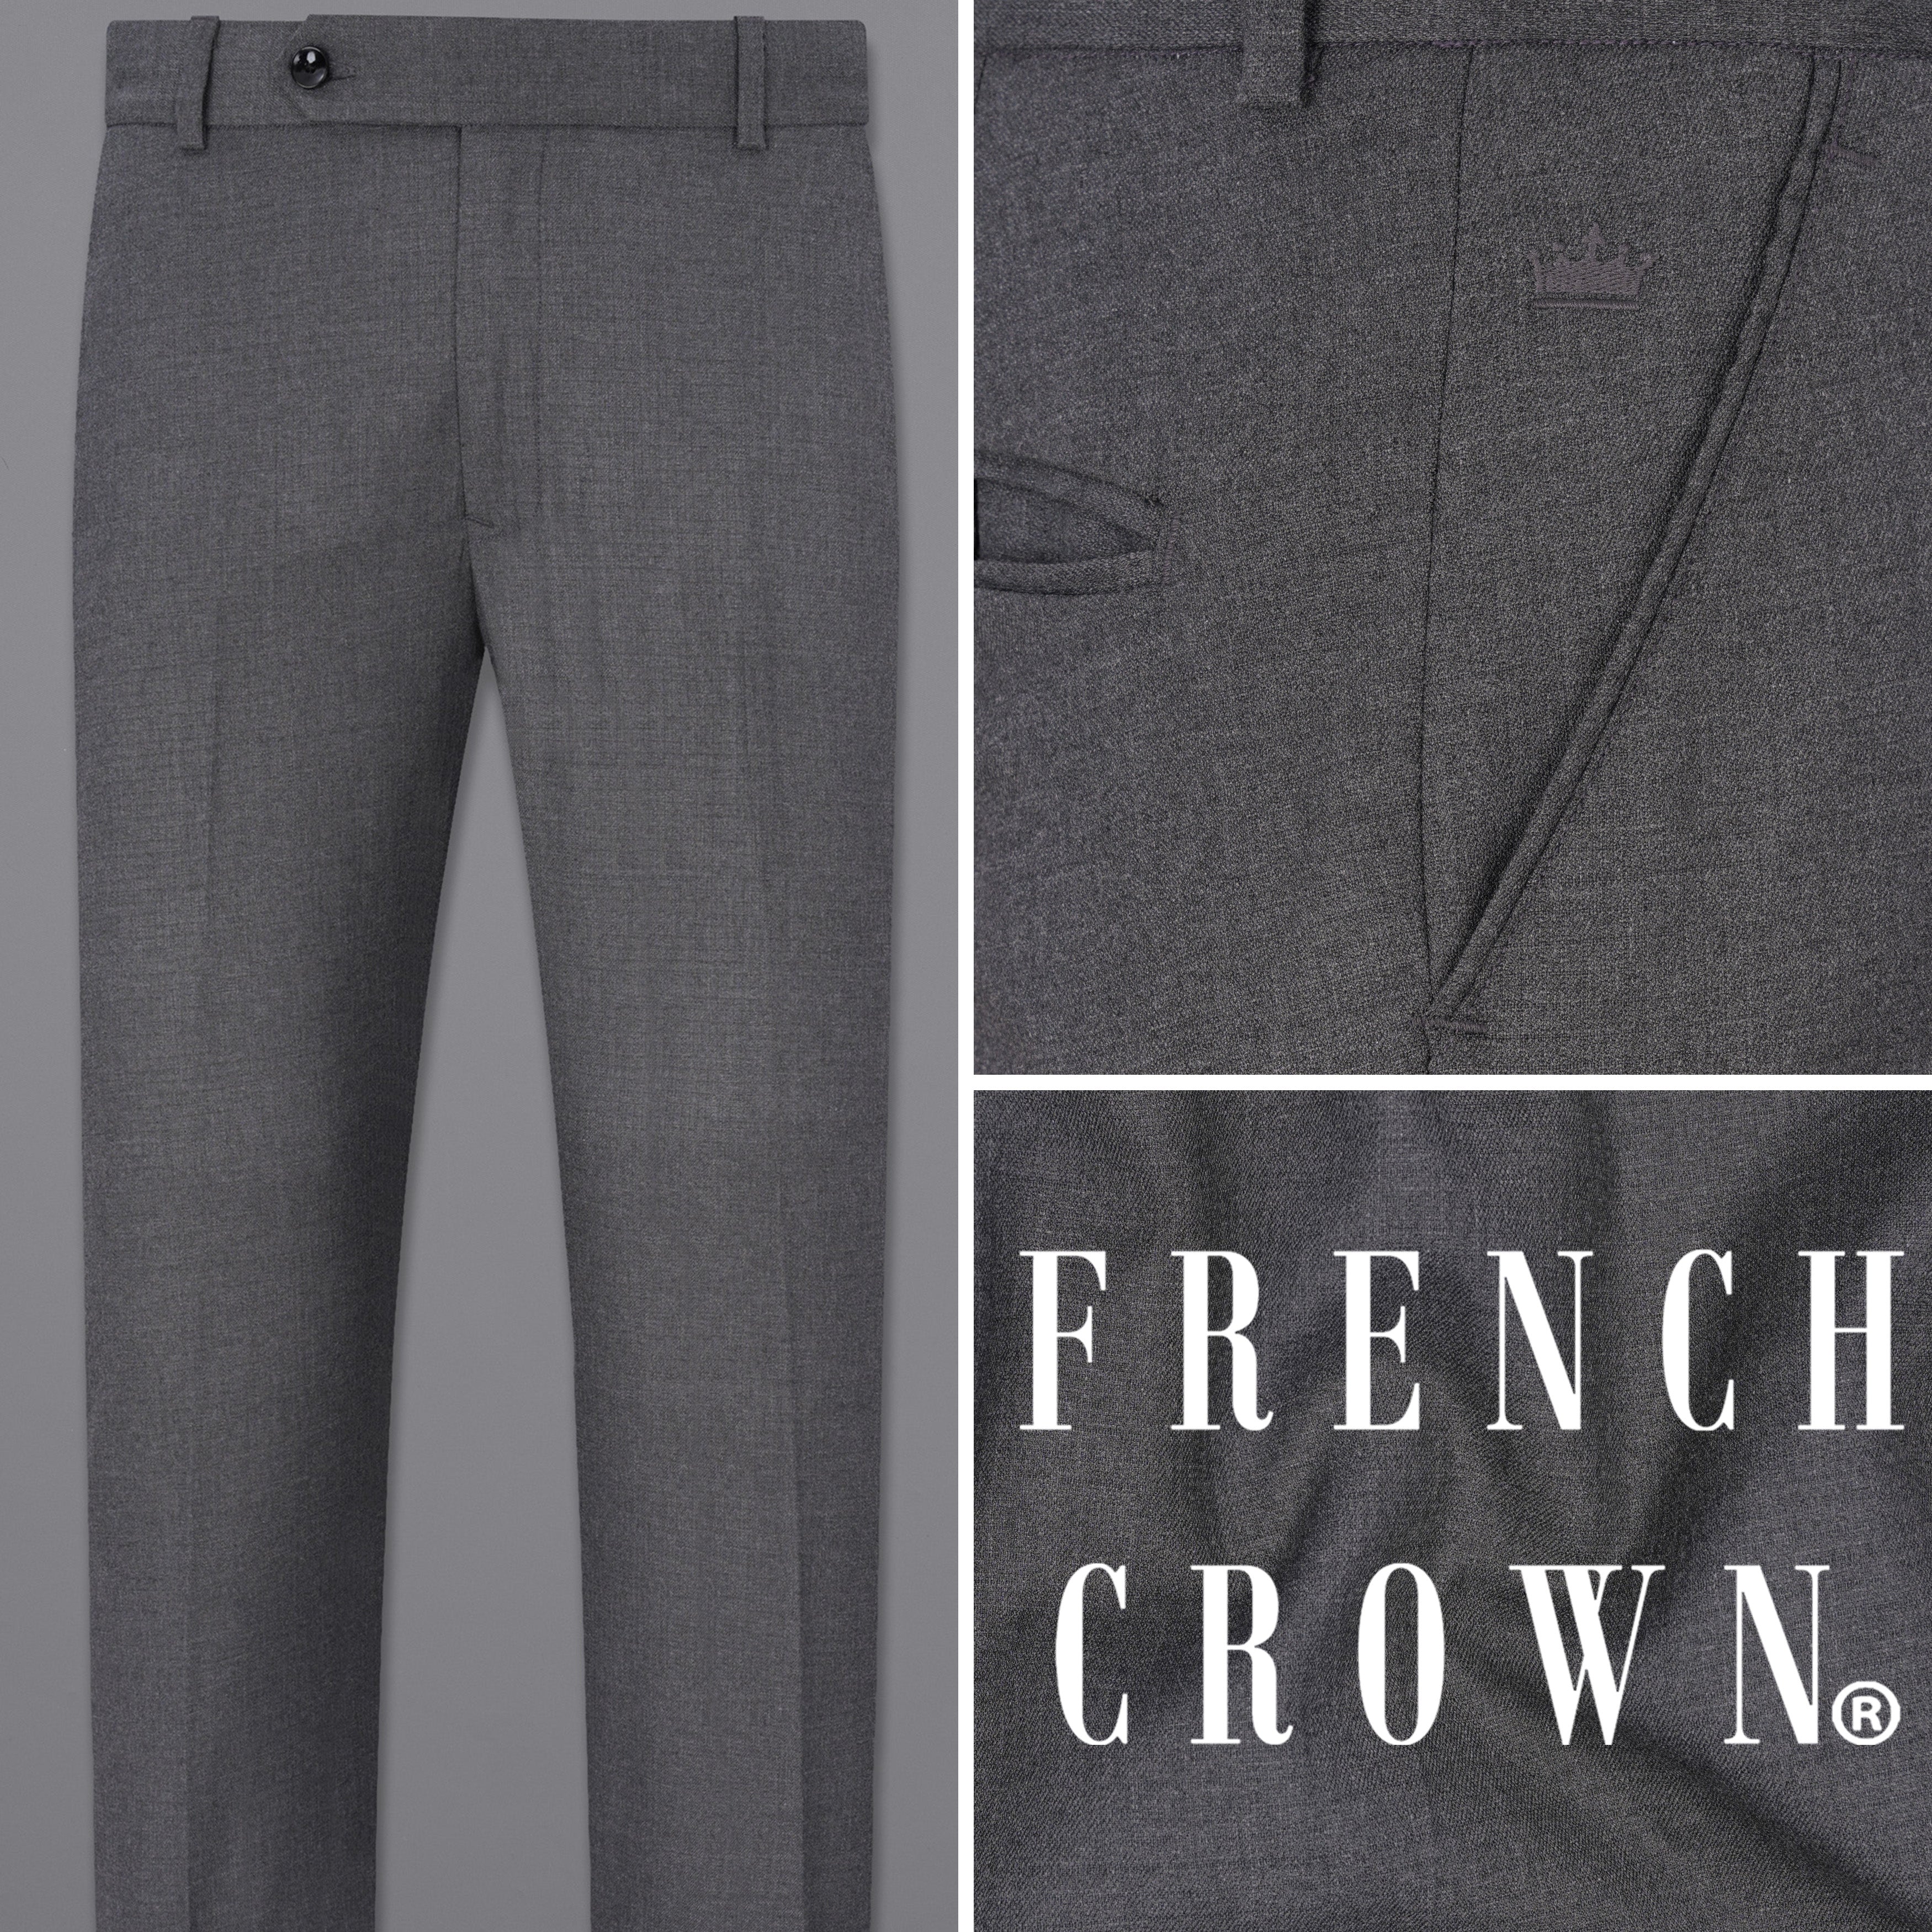 Buy Grey Trousers & Pants for Men by INDEPENDENCE Online | Ajio.com